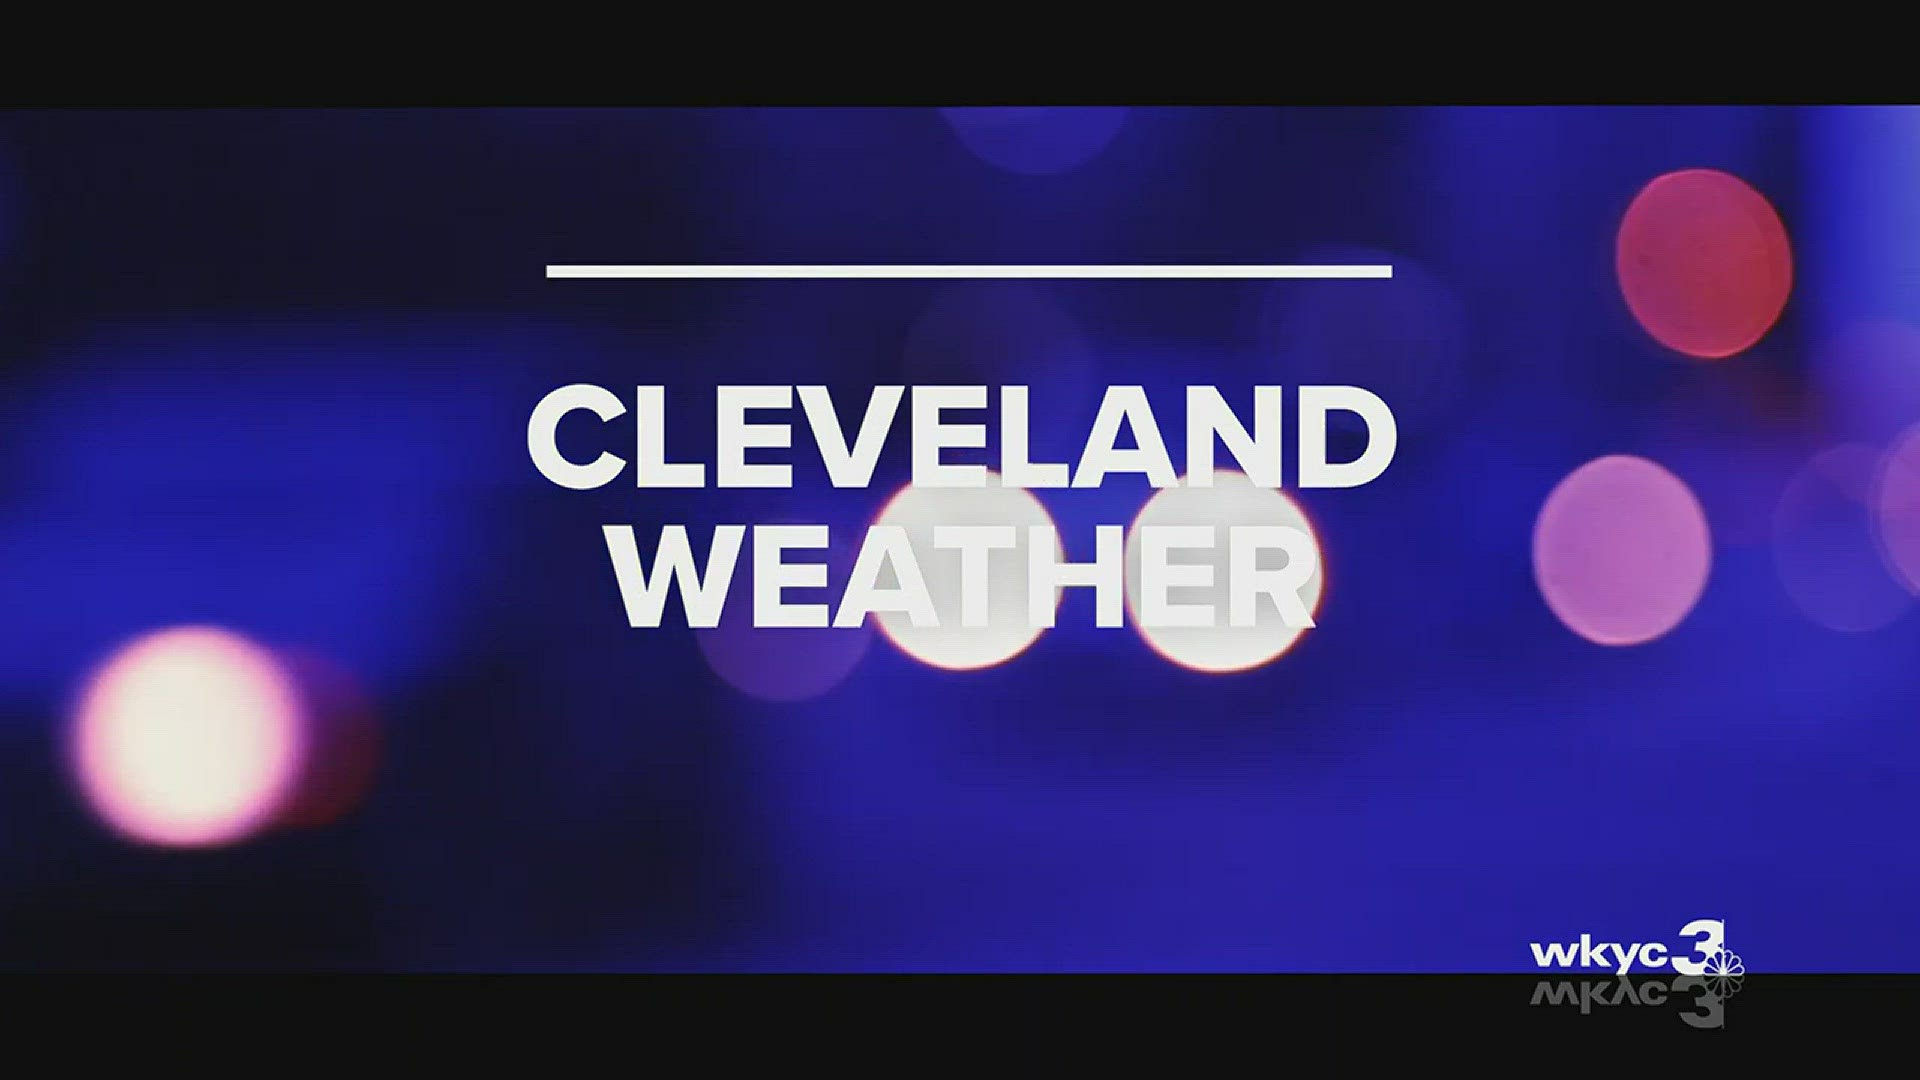 Fall is behind us and winter is here. Stay "Weather Ready" with the Channel 3 Weather team on-air and on-line for winter weather coverage you can depend on 24/7. #3weather